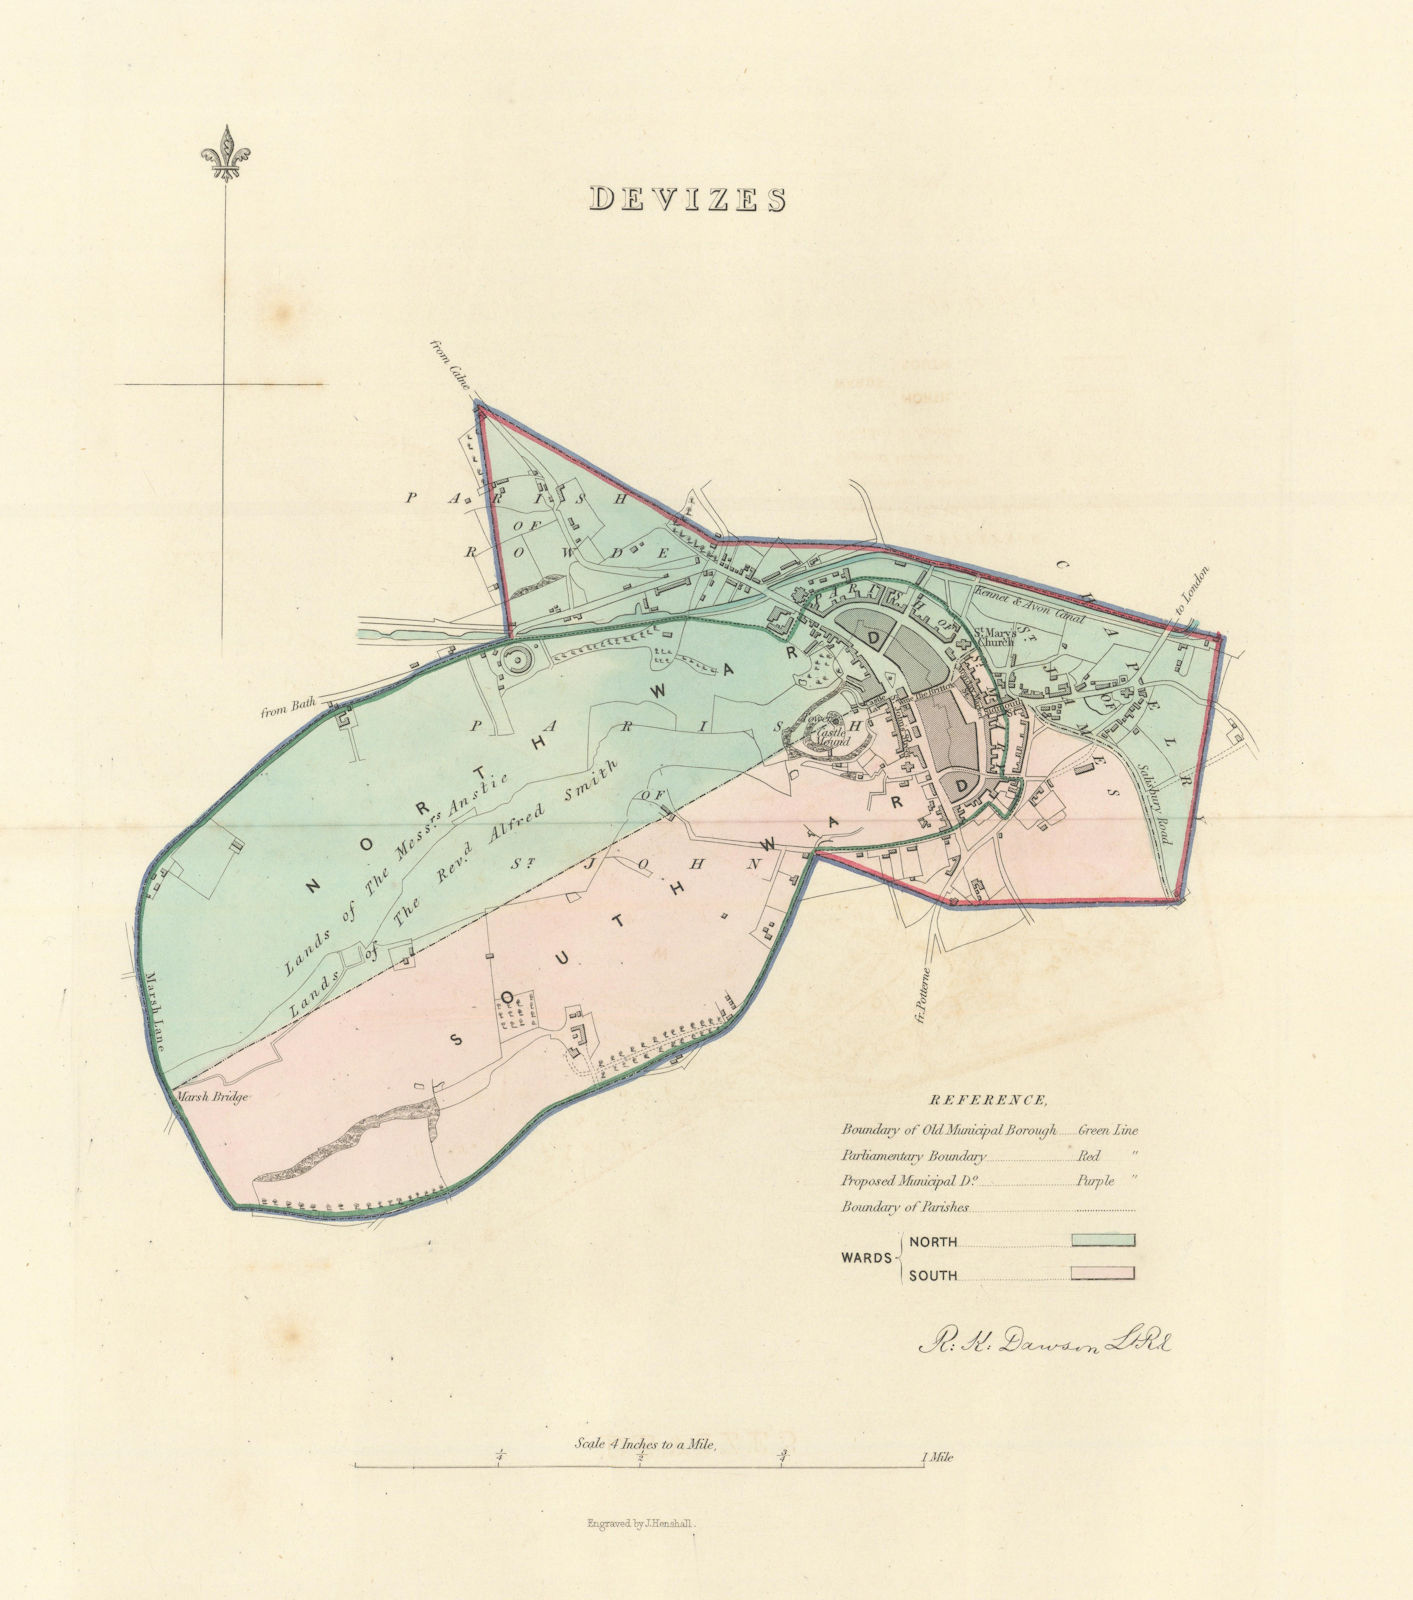 Associate Product DEVIZES borough/town plan. BOUNDARY COMMISSION. Wiltshire. DAWSON 1837 old map